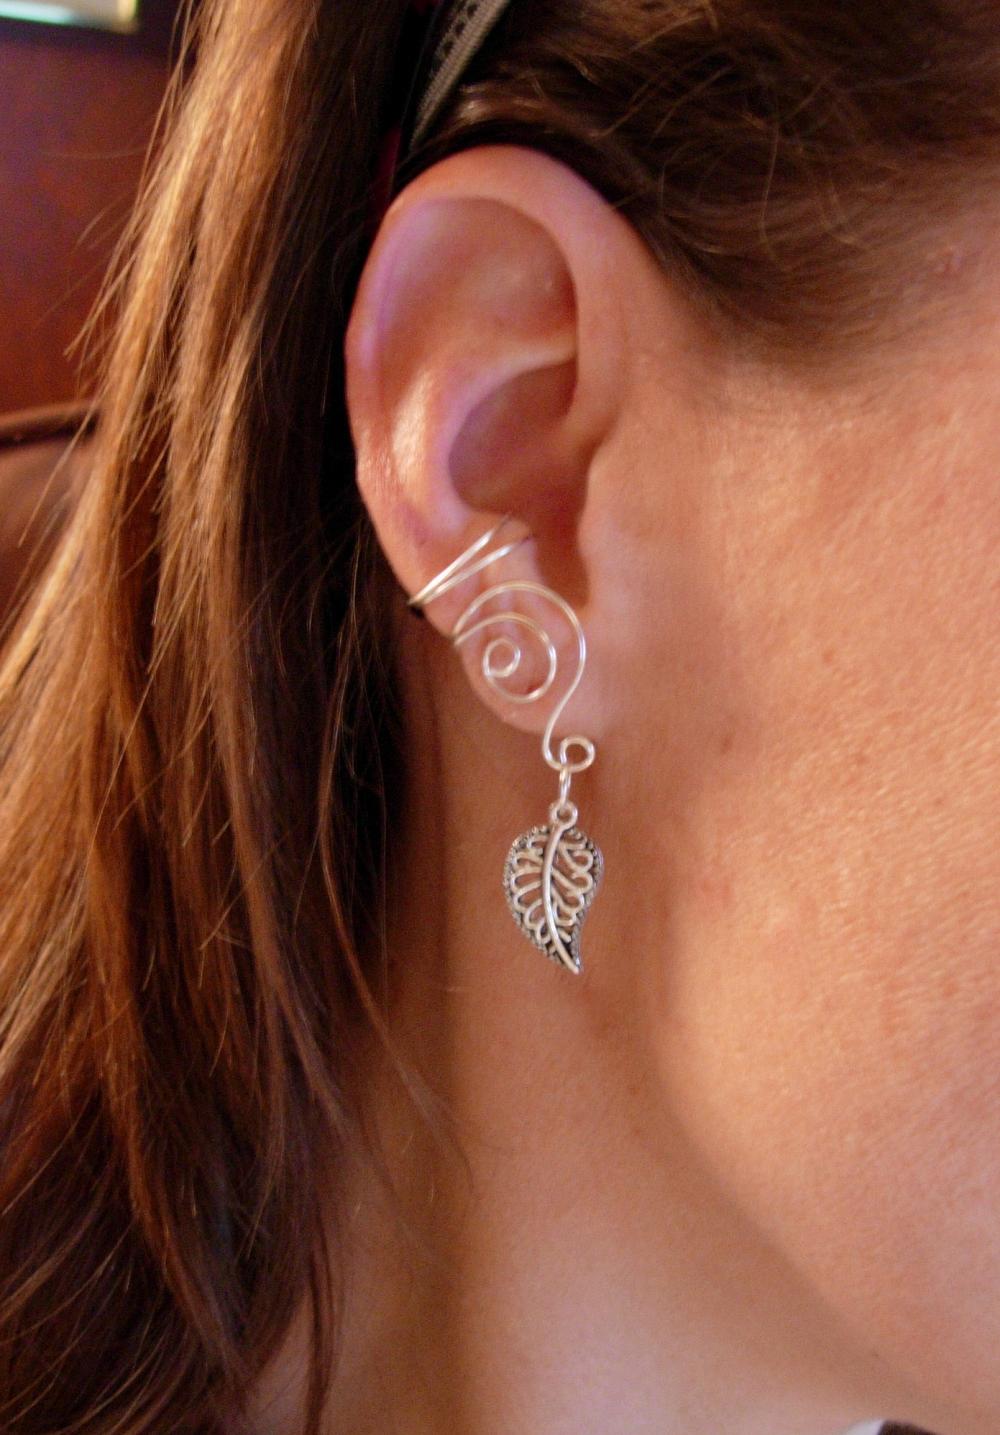 Pair Of Silver Plated Ear Cuffs With Antiqued Silver Leaf Accent Beads